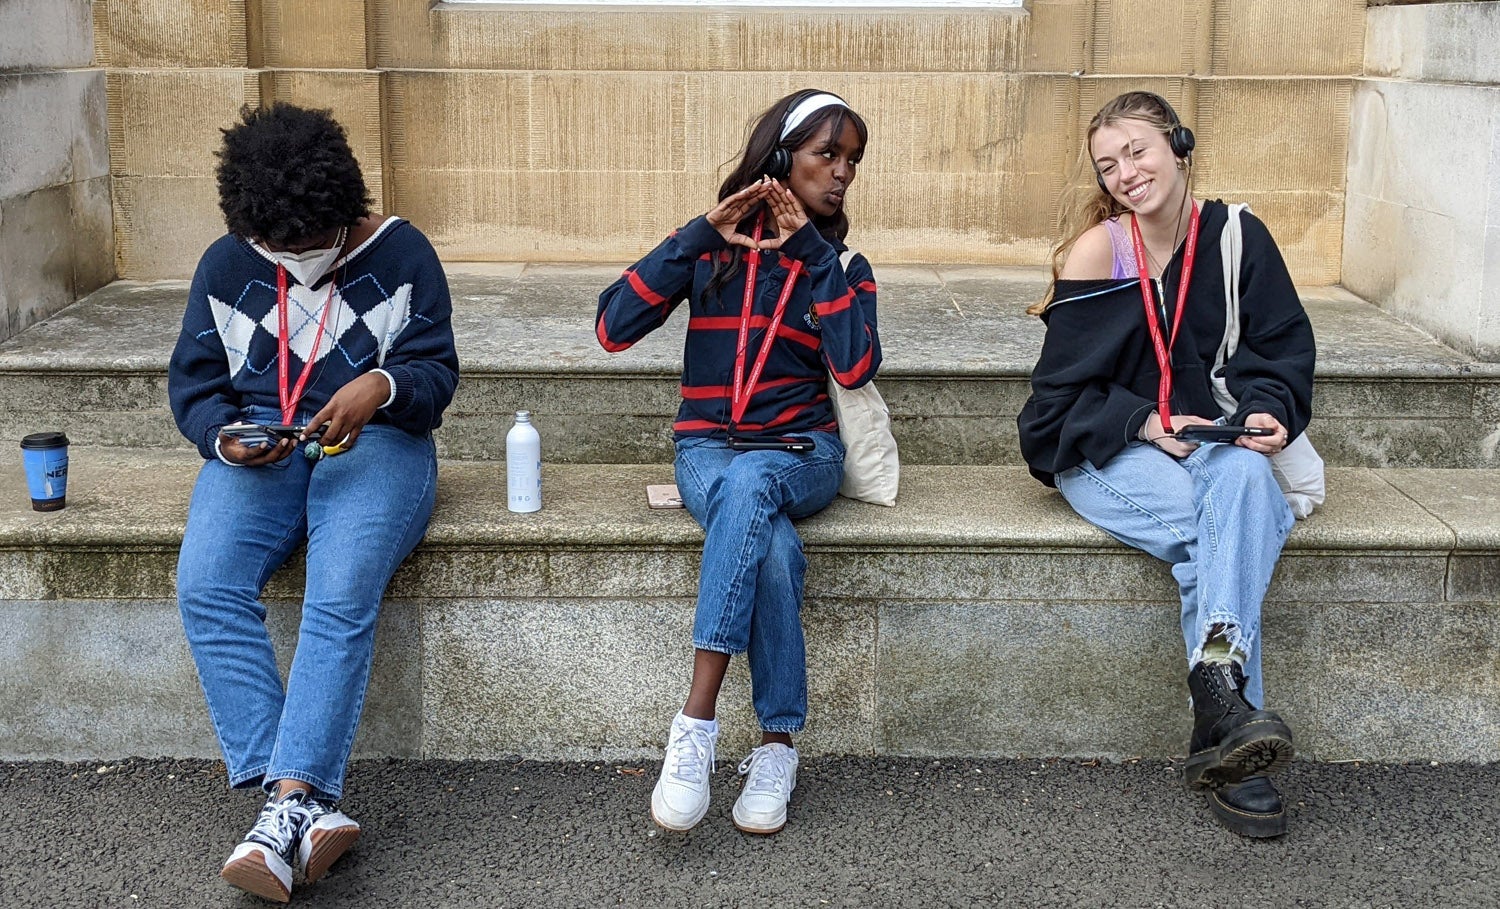 UO students at Christ Church, an Oxford University College